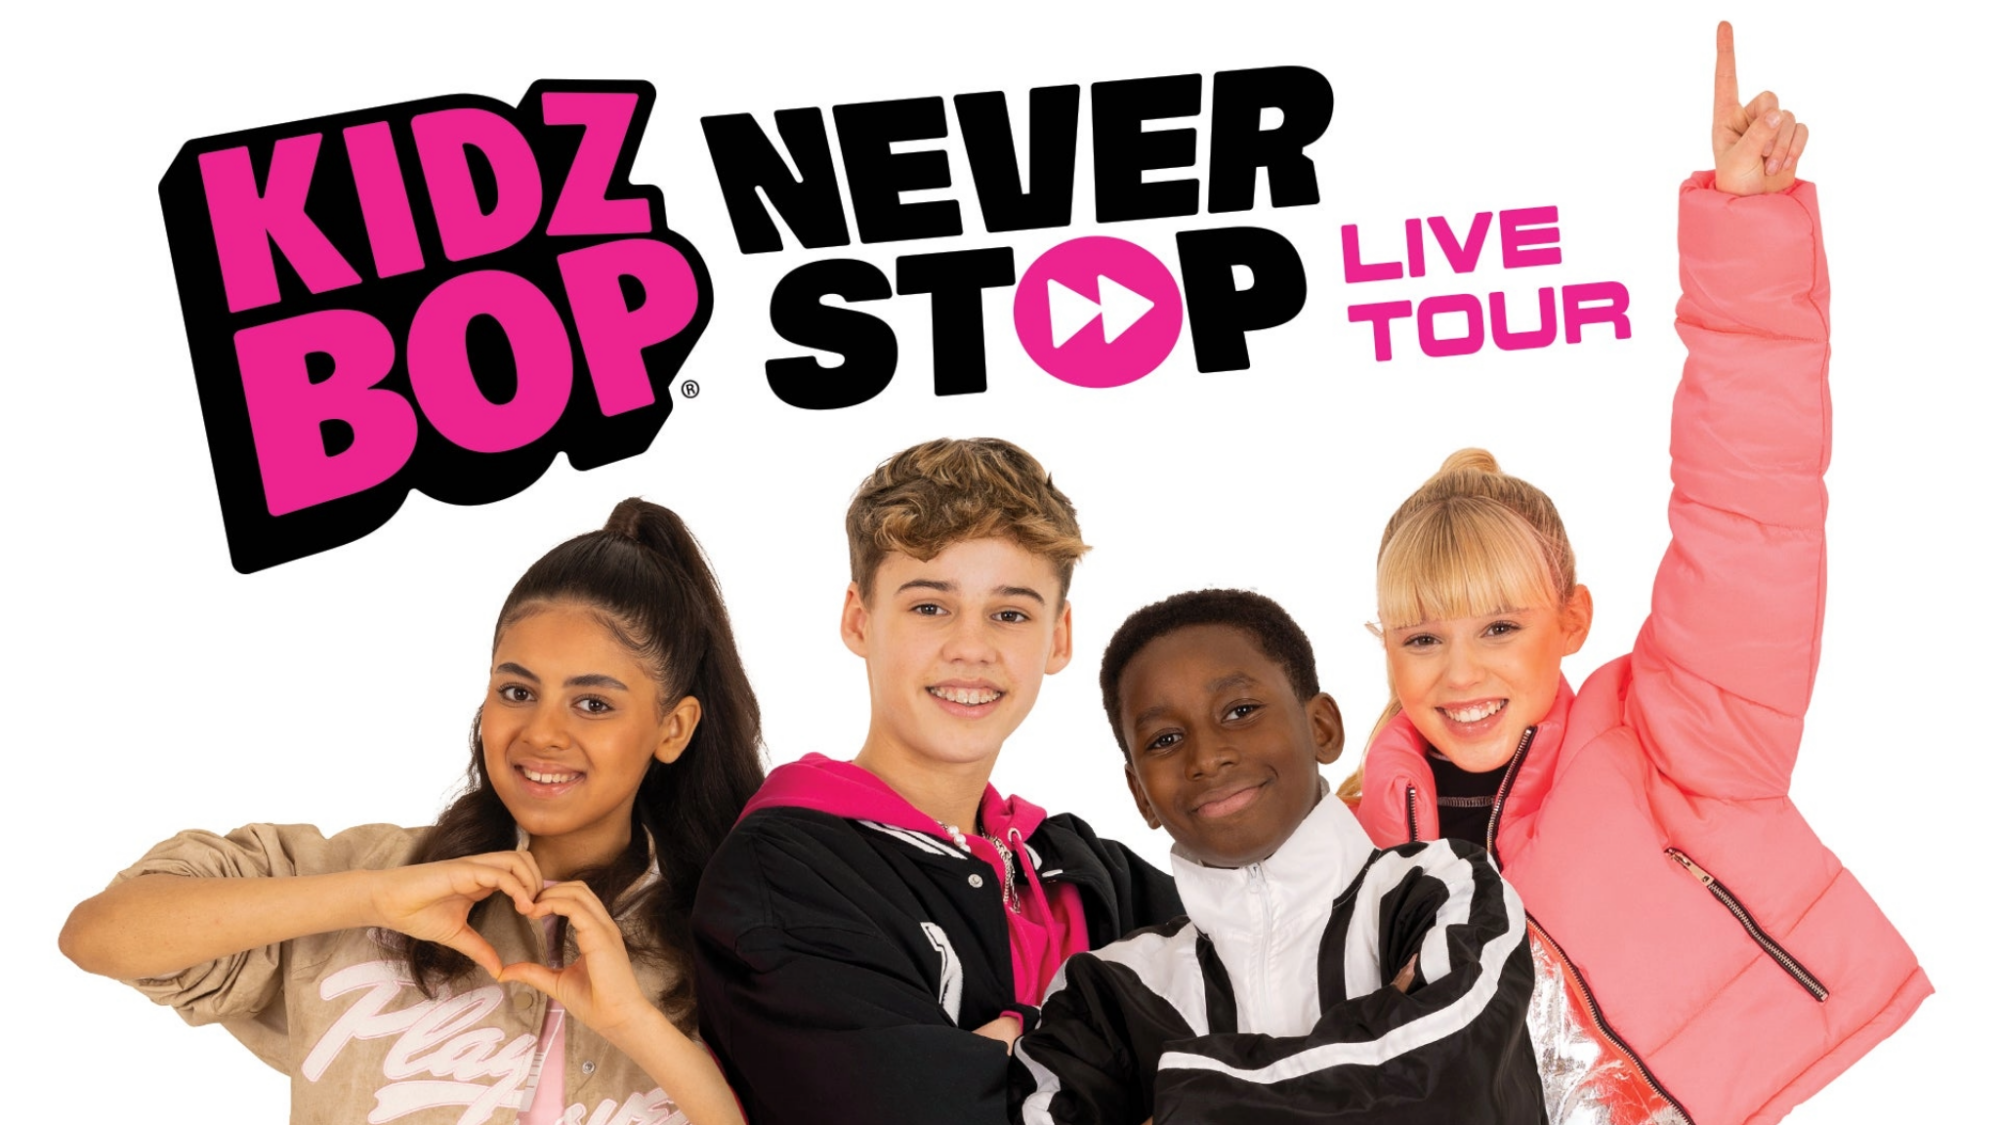 Image name KIDZ BOP Never Stop Live Tour at Sheffield City Hall Oval Hall Sheffield the 20 image from the post KIDZ BOP NEVER STOP TOUR at York Barbican, York in Yorkshire.com.